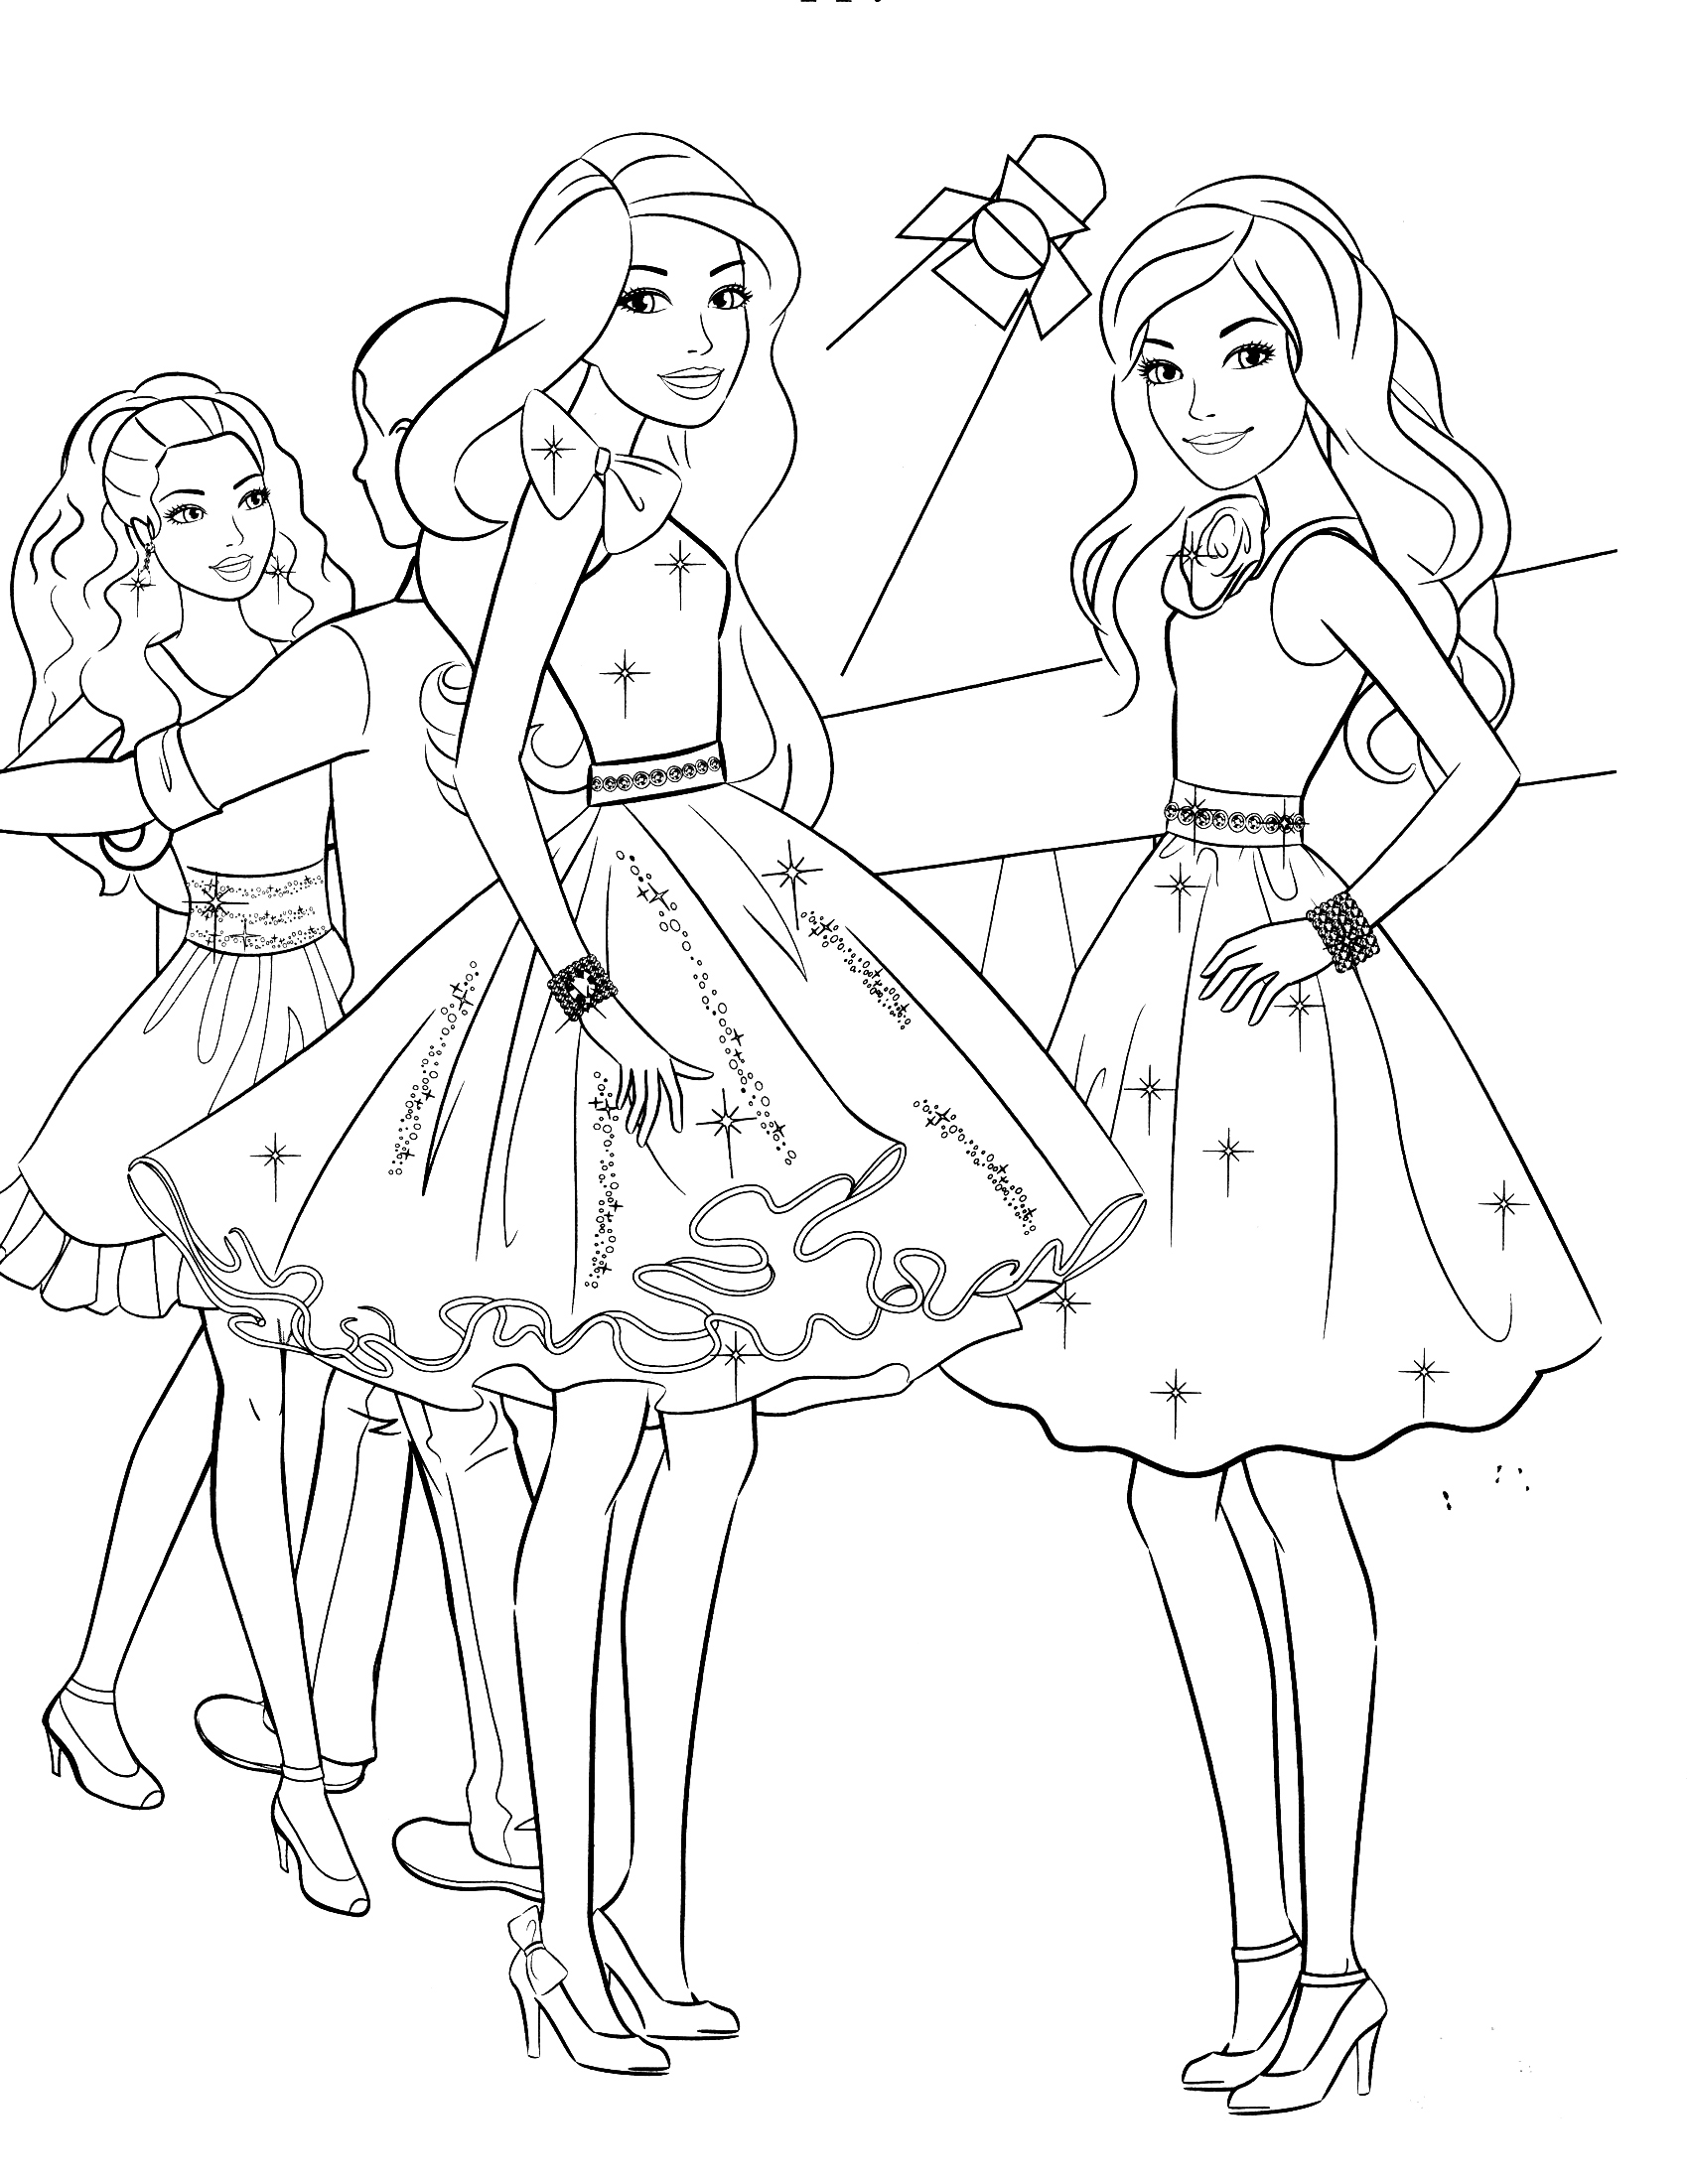 Barbie dream house printable coloring pages